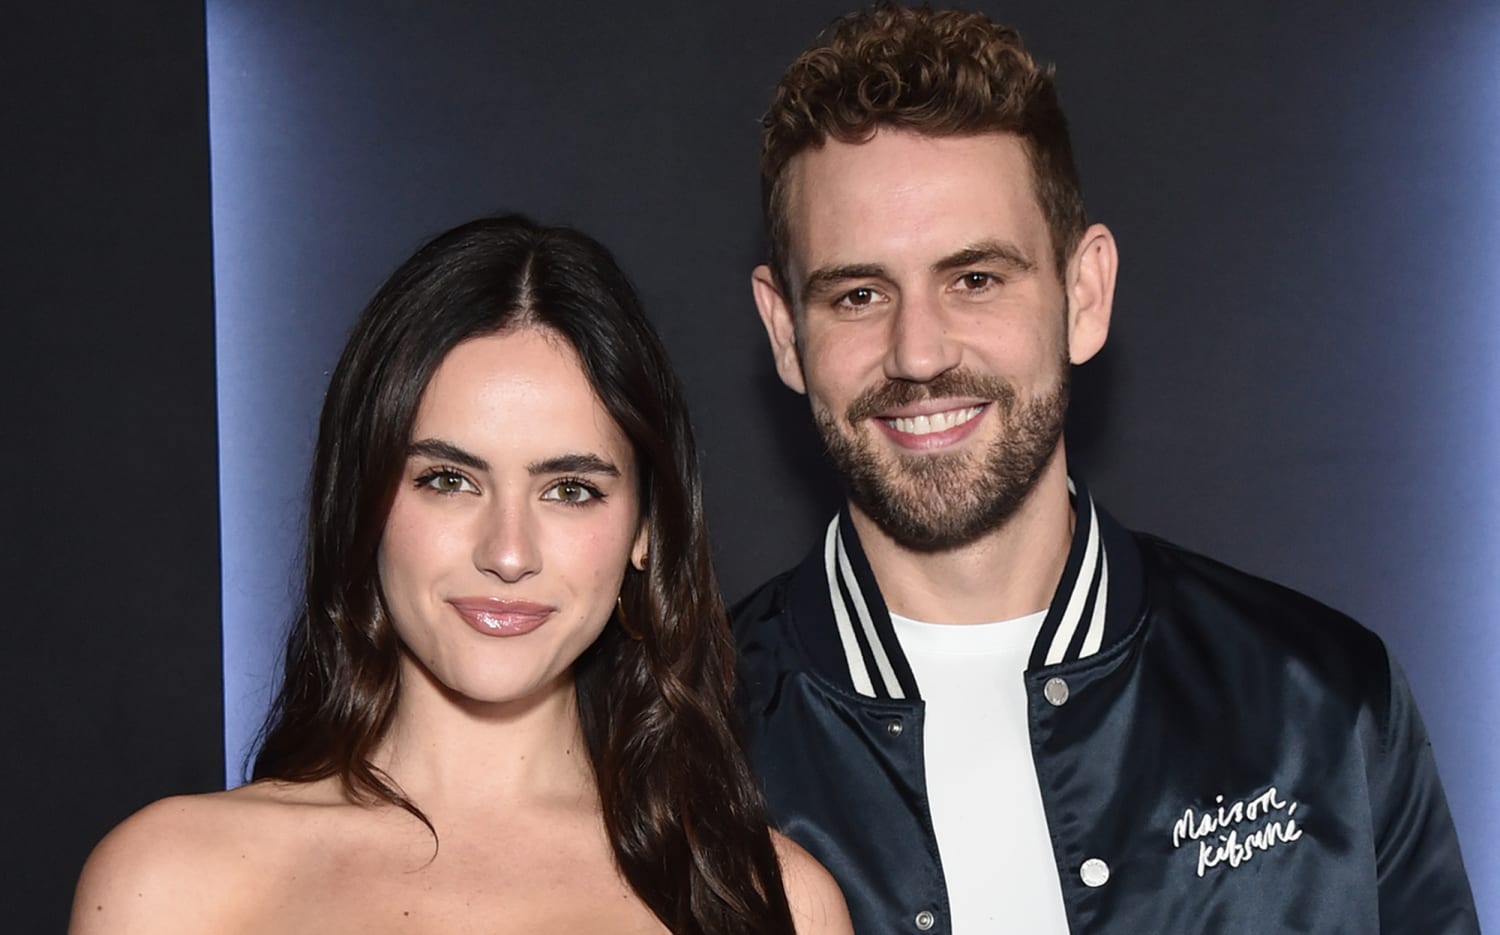 Nick Viall and Fiancée Natalie Joy Expecting First Baby A Look at Their Relationship image pic